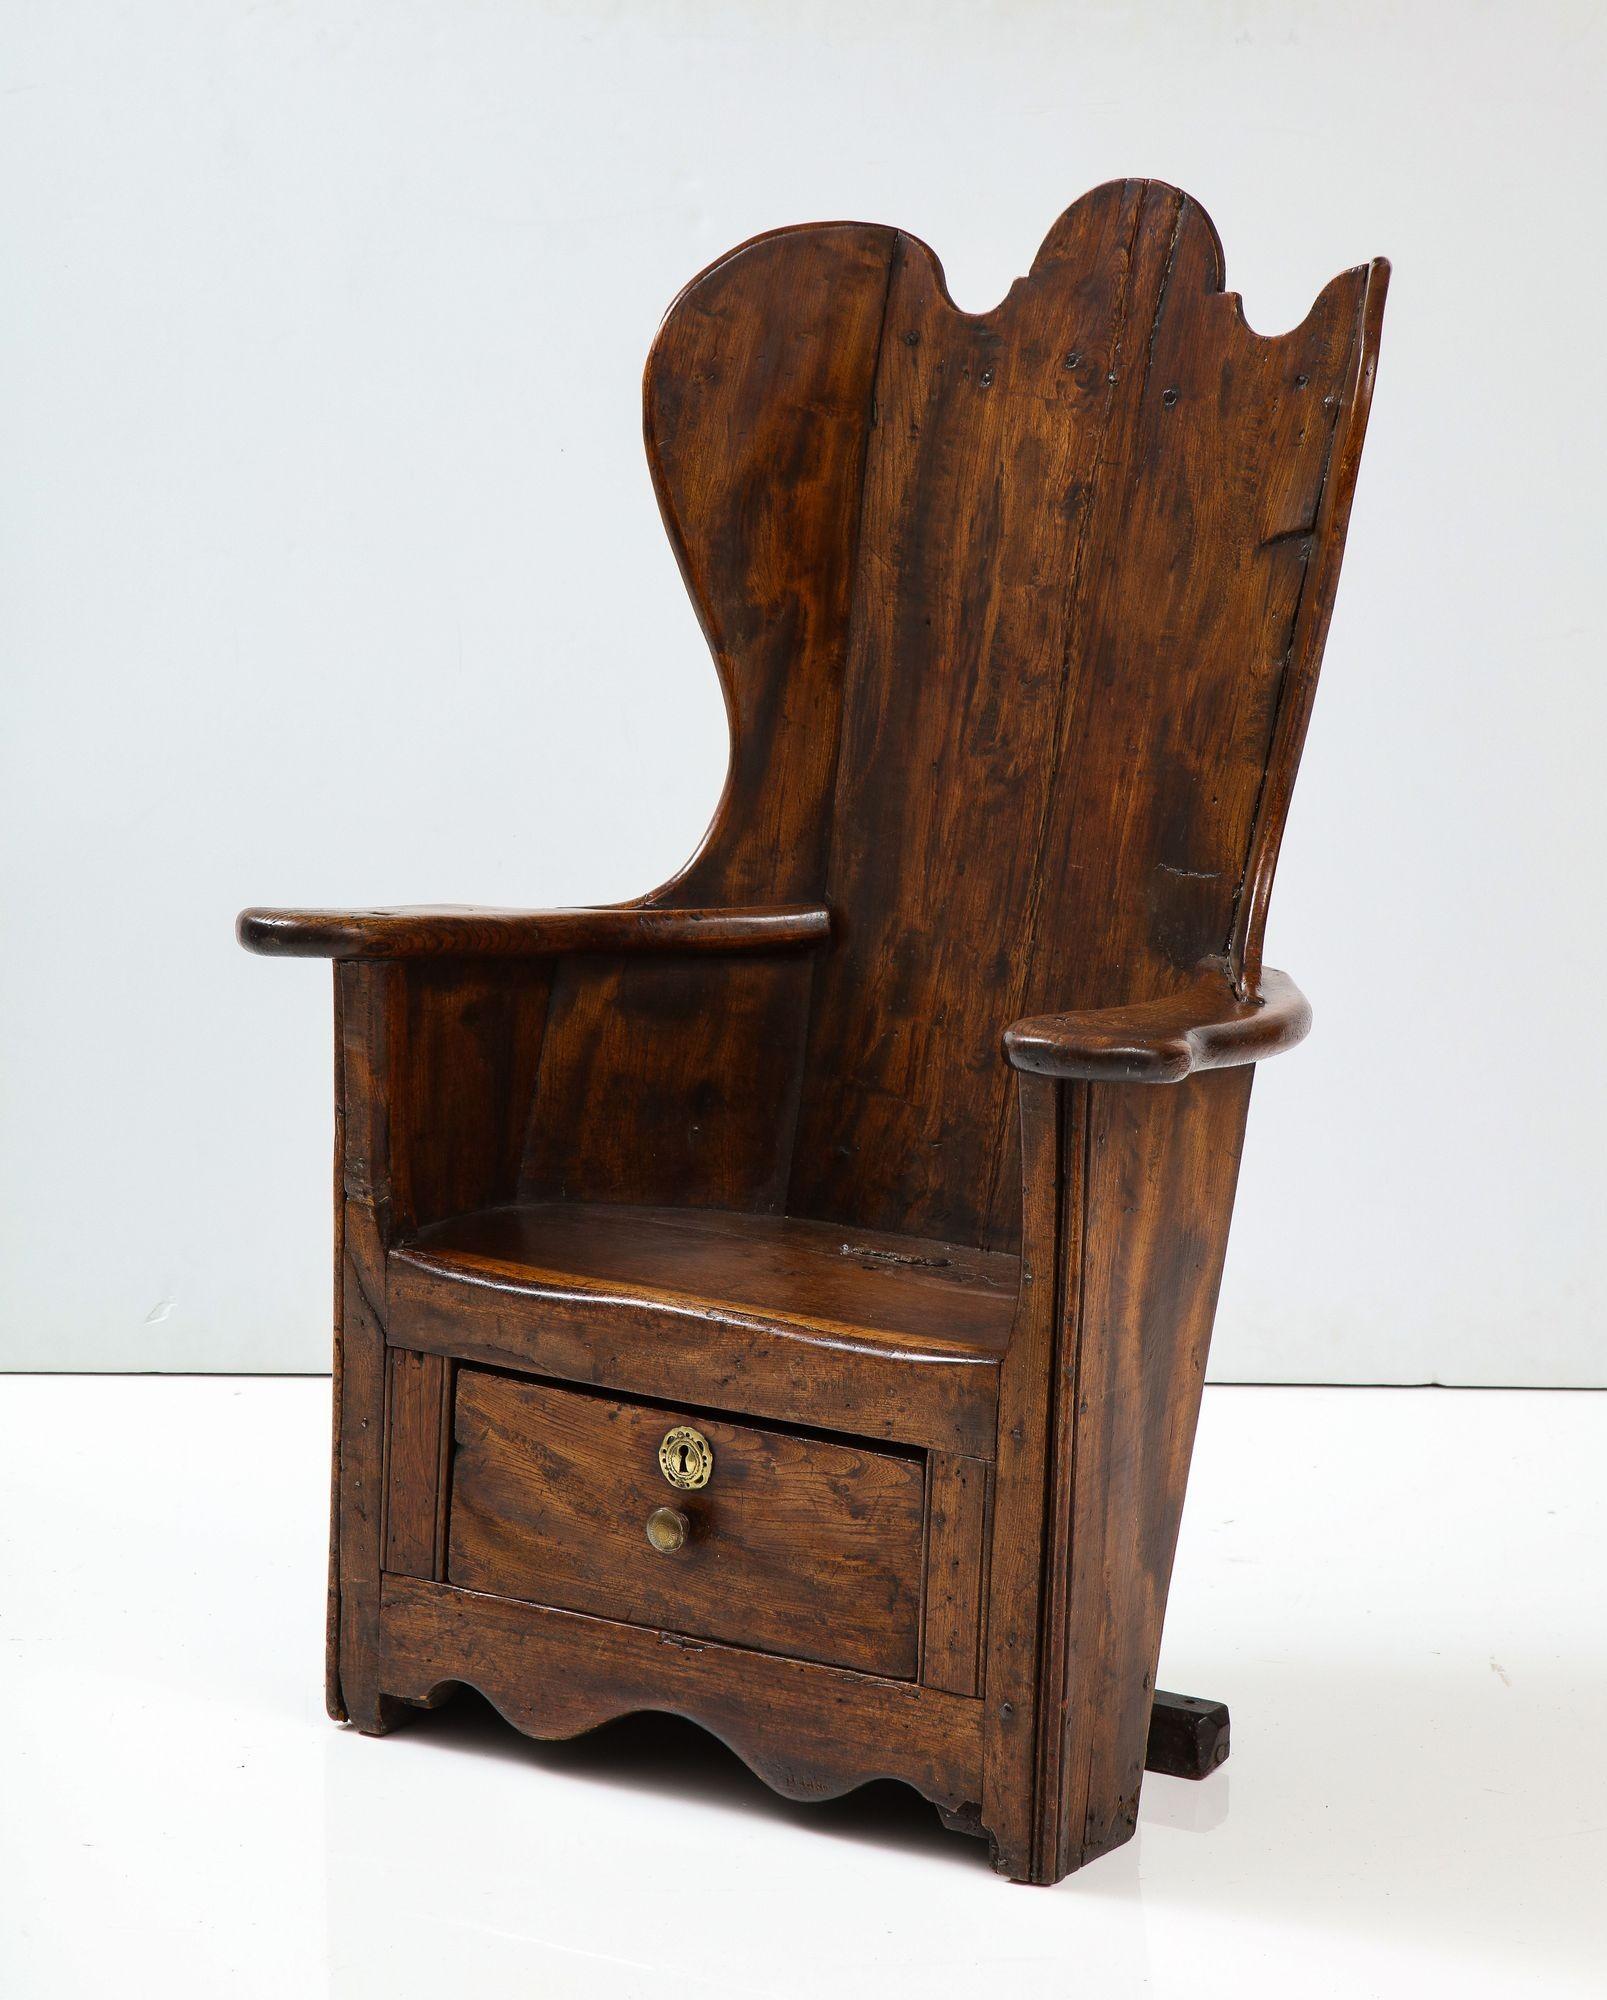 A paneled chair in elm and oak with solid back and sides and single drawer under seat, with well-formed curved flattened arms ending in broadened hand supports suitable for supporting a cup of tea, featuring canted side wings and a deeply scalloped